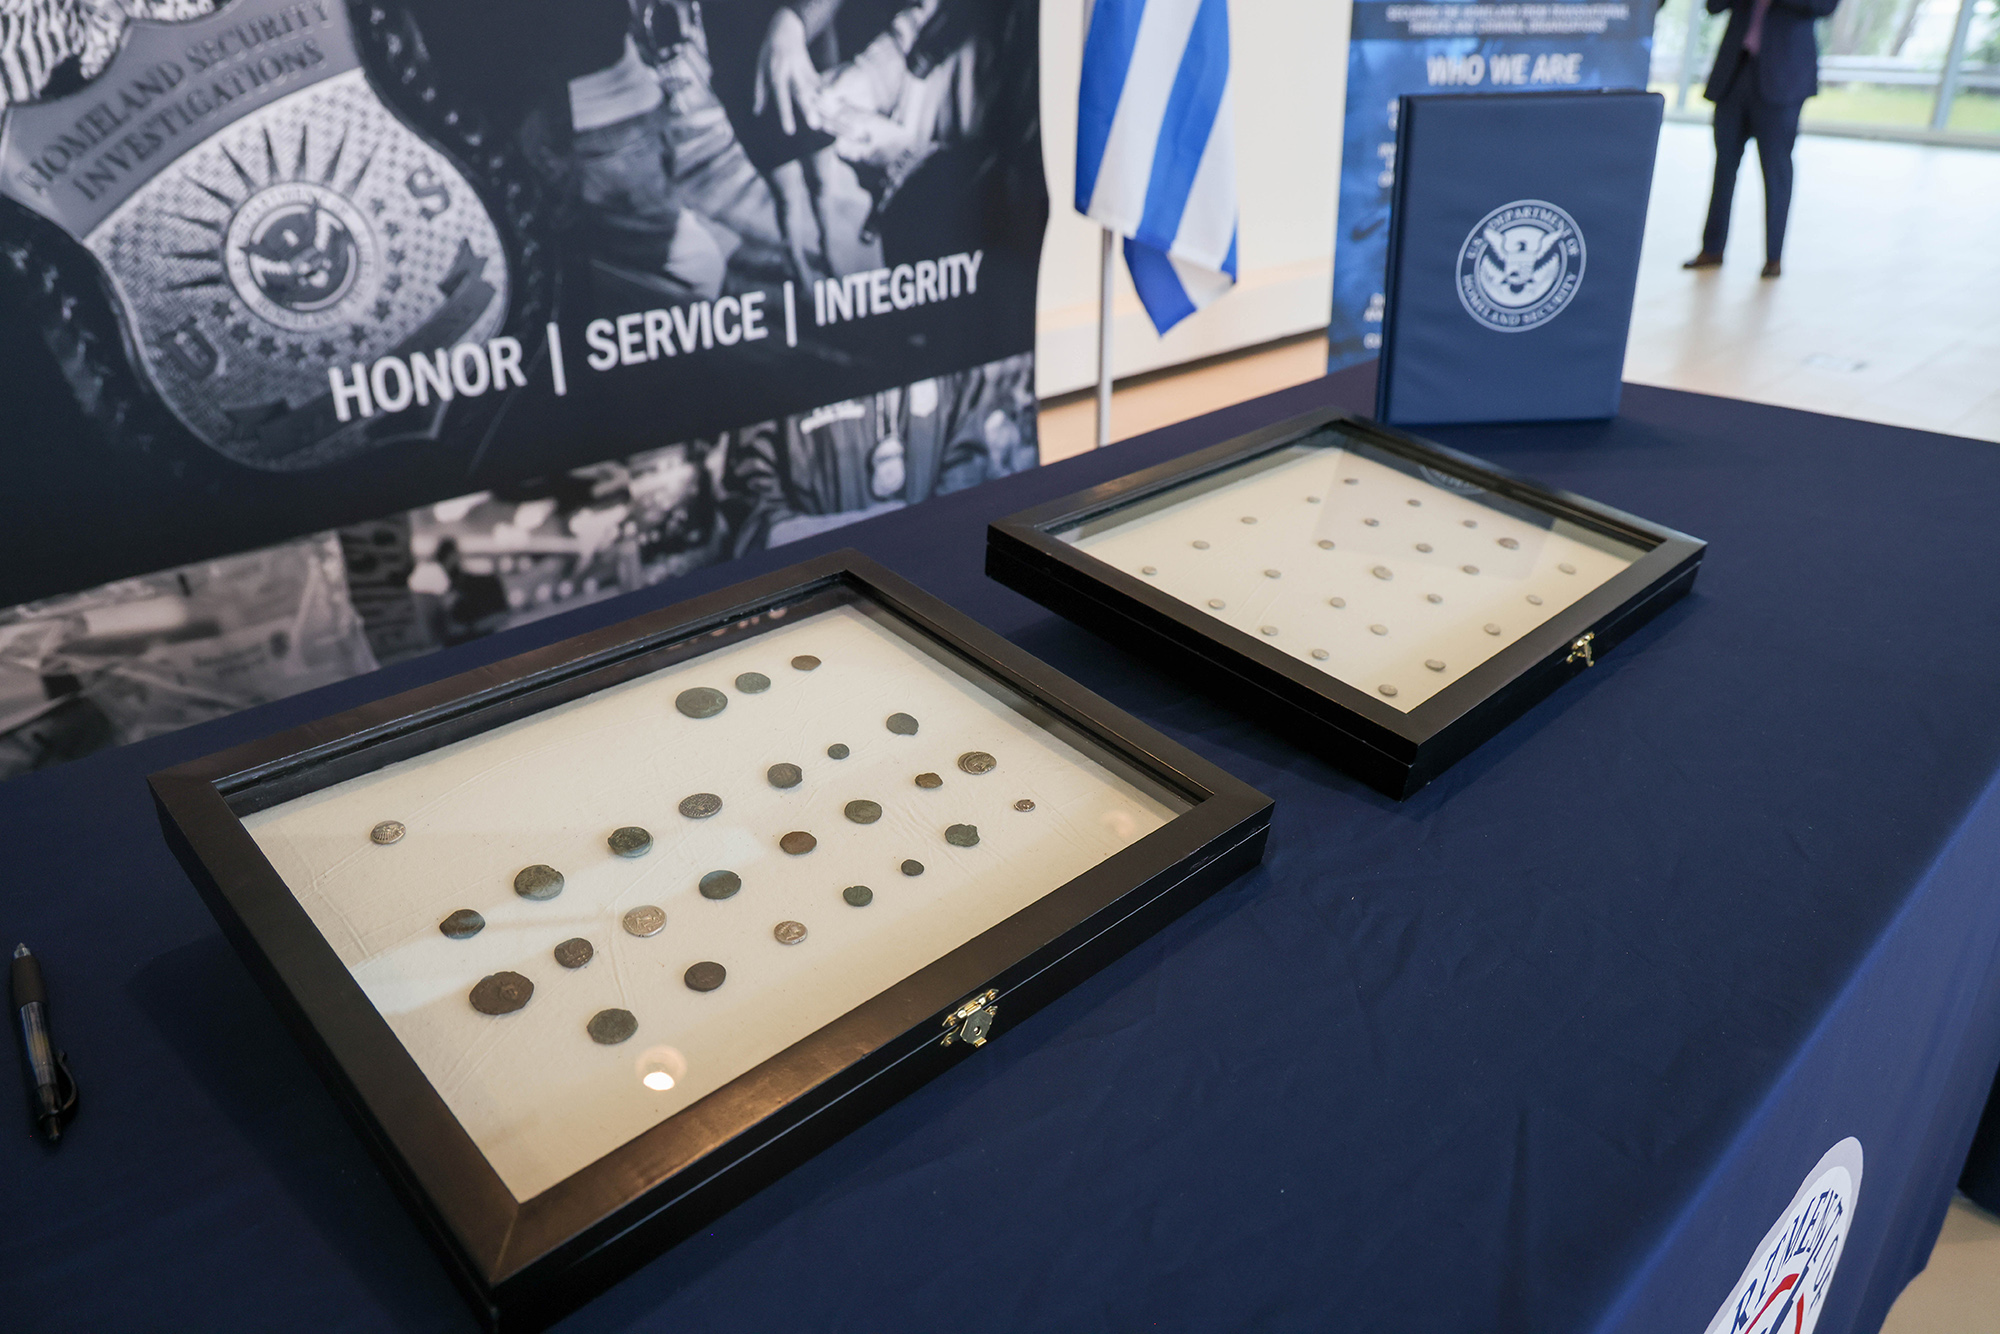 Federal agents, National Hellenic Museum conduct largest repatriation of ancient coins to Greece in recent HSI history